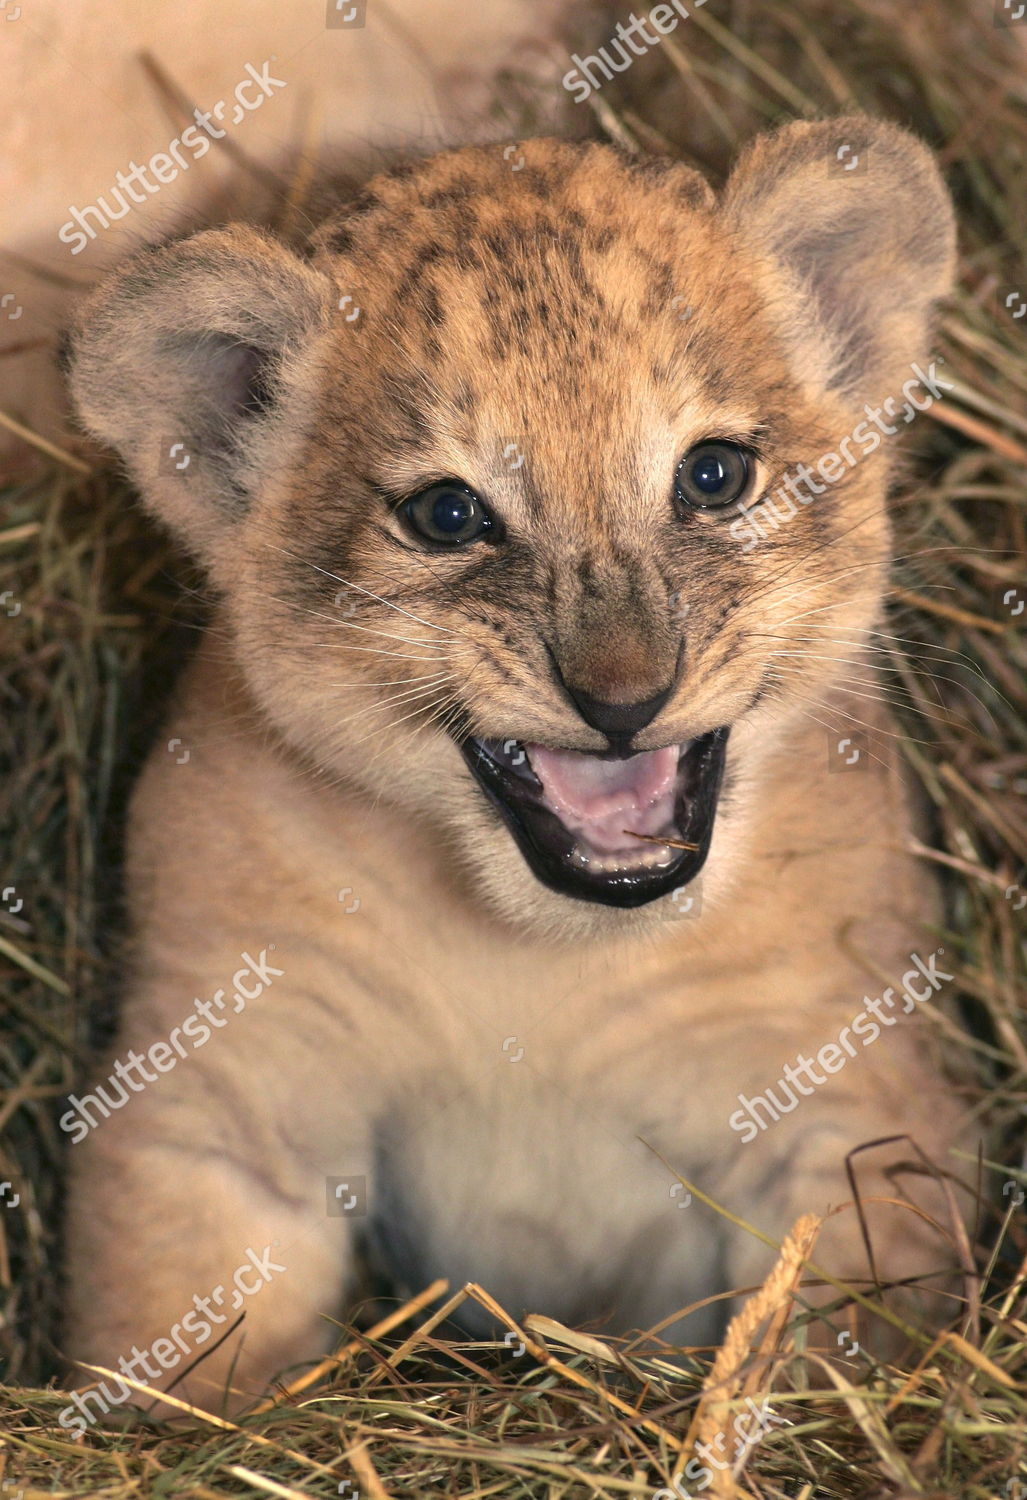 Picture Shows Baby Barbary Lion Lekysha Beauty Editorial Stock Photo Stock Image Shutterstock